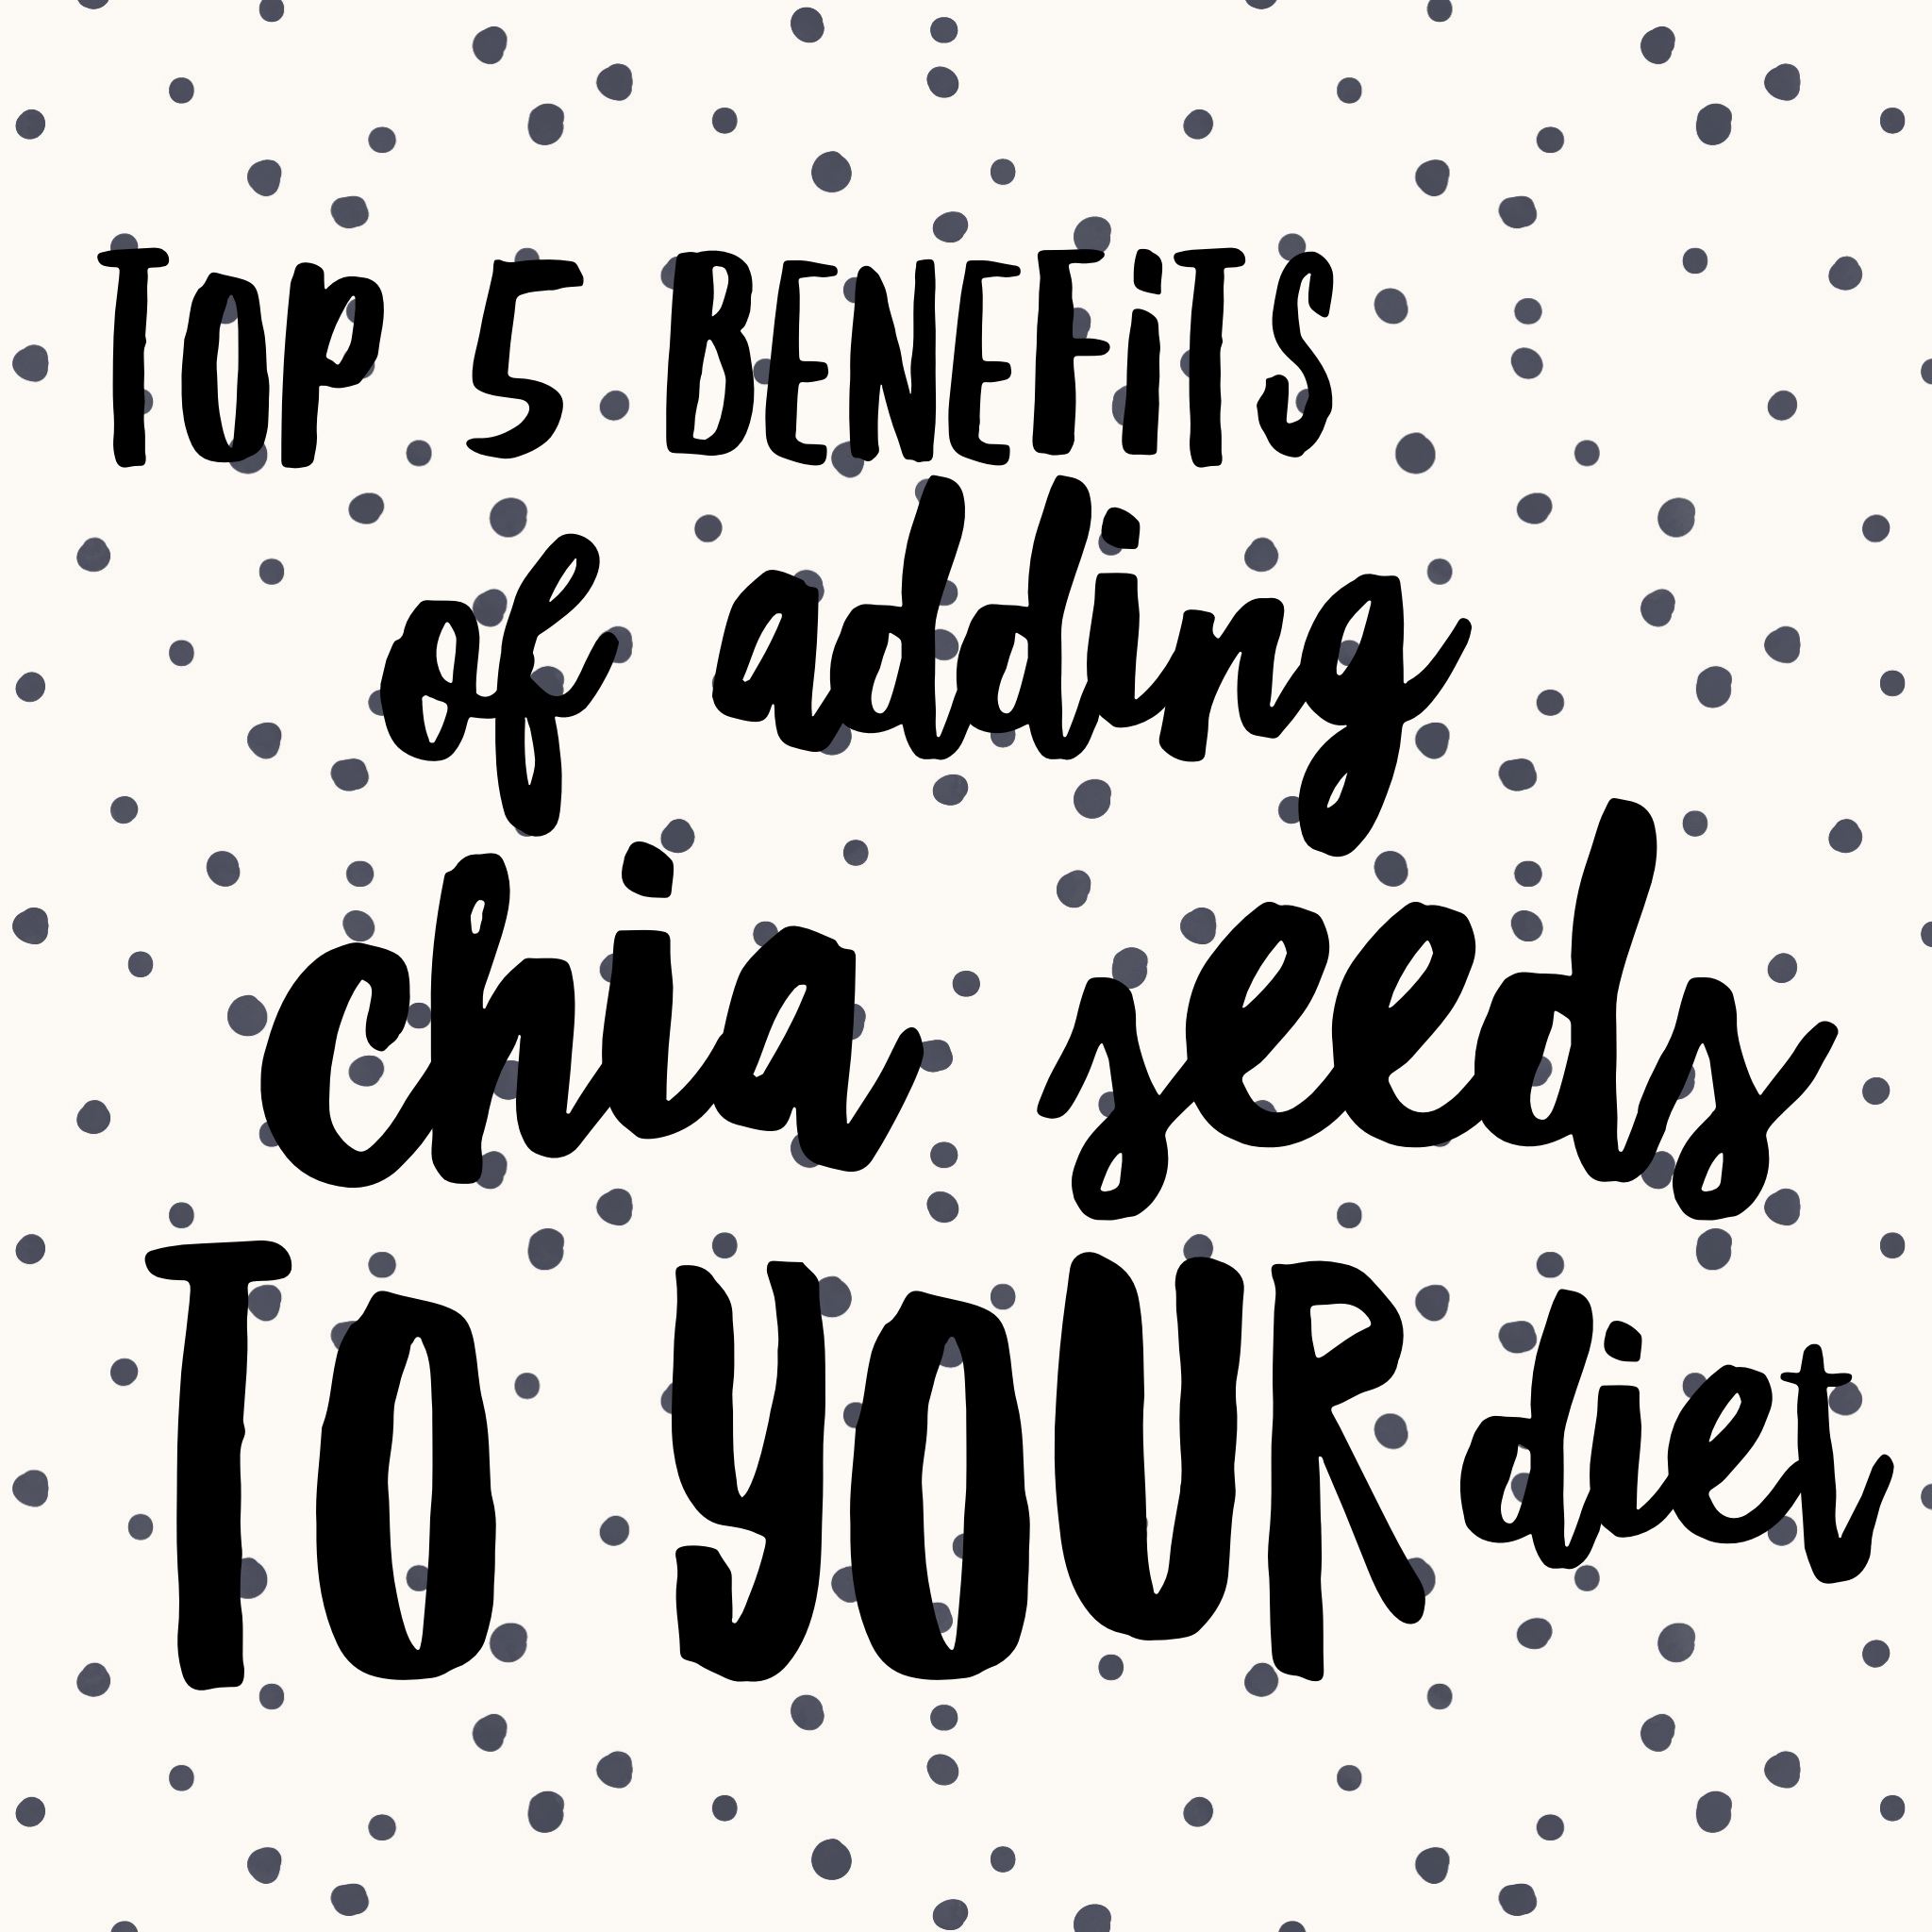 Weekly Tip- Top 5 benefits of adding chia seeds to your diet